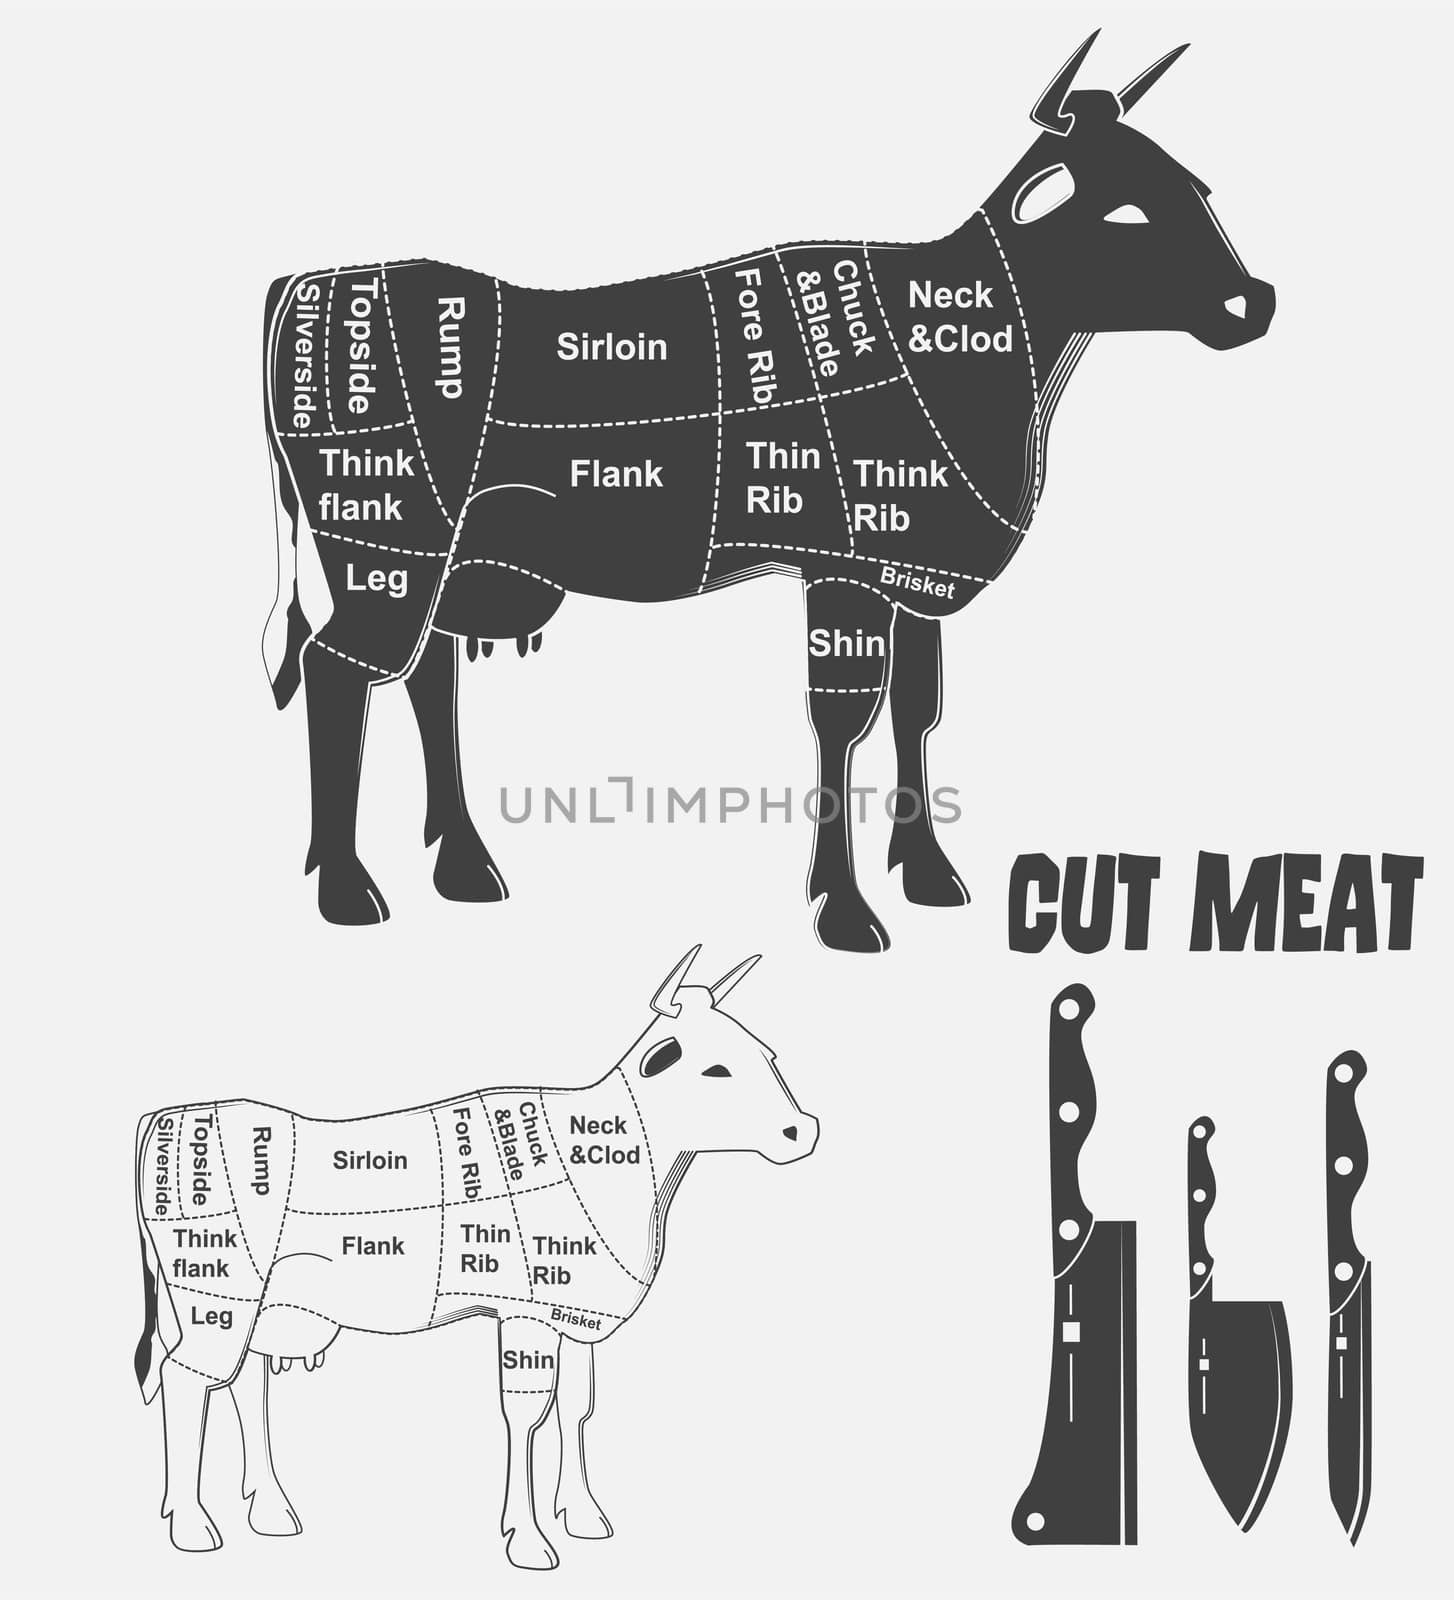 British cuts of veal, beef or animal diagram meat. by Adamchuk